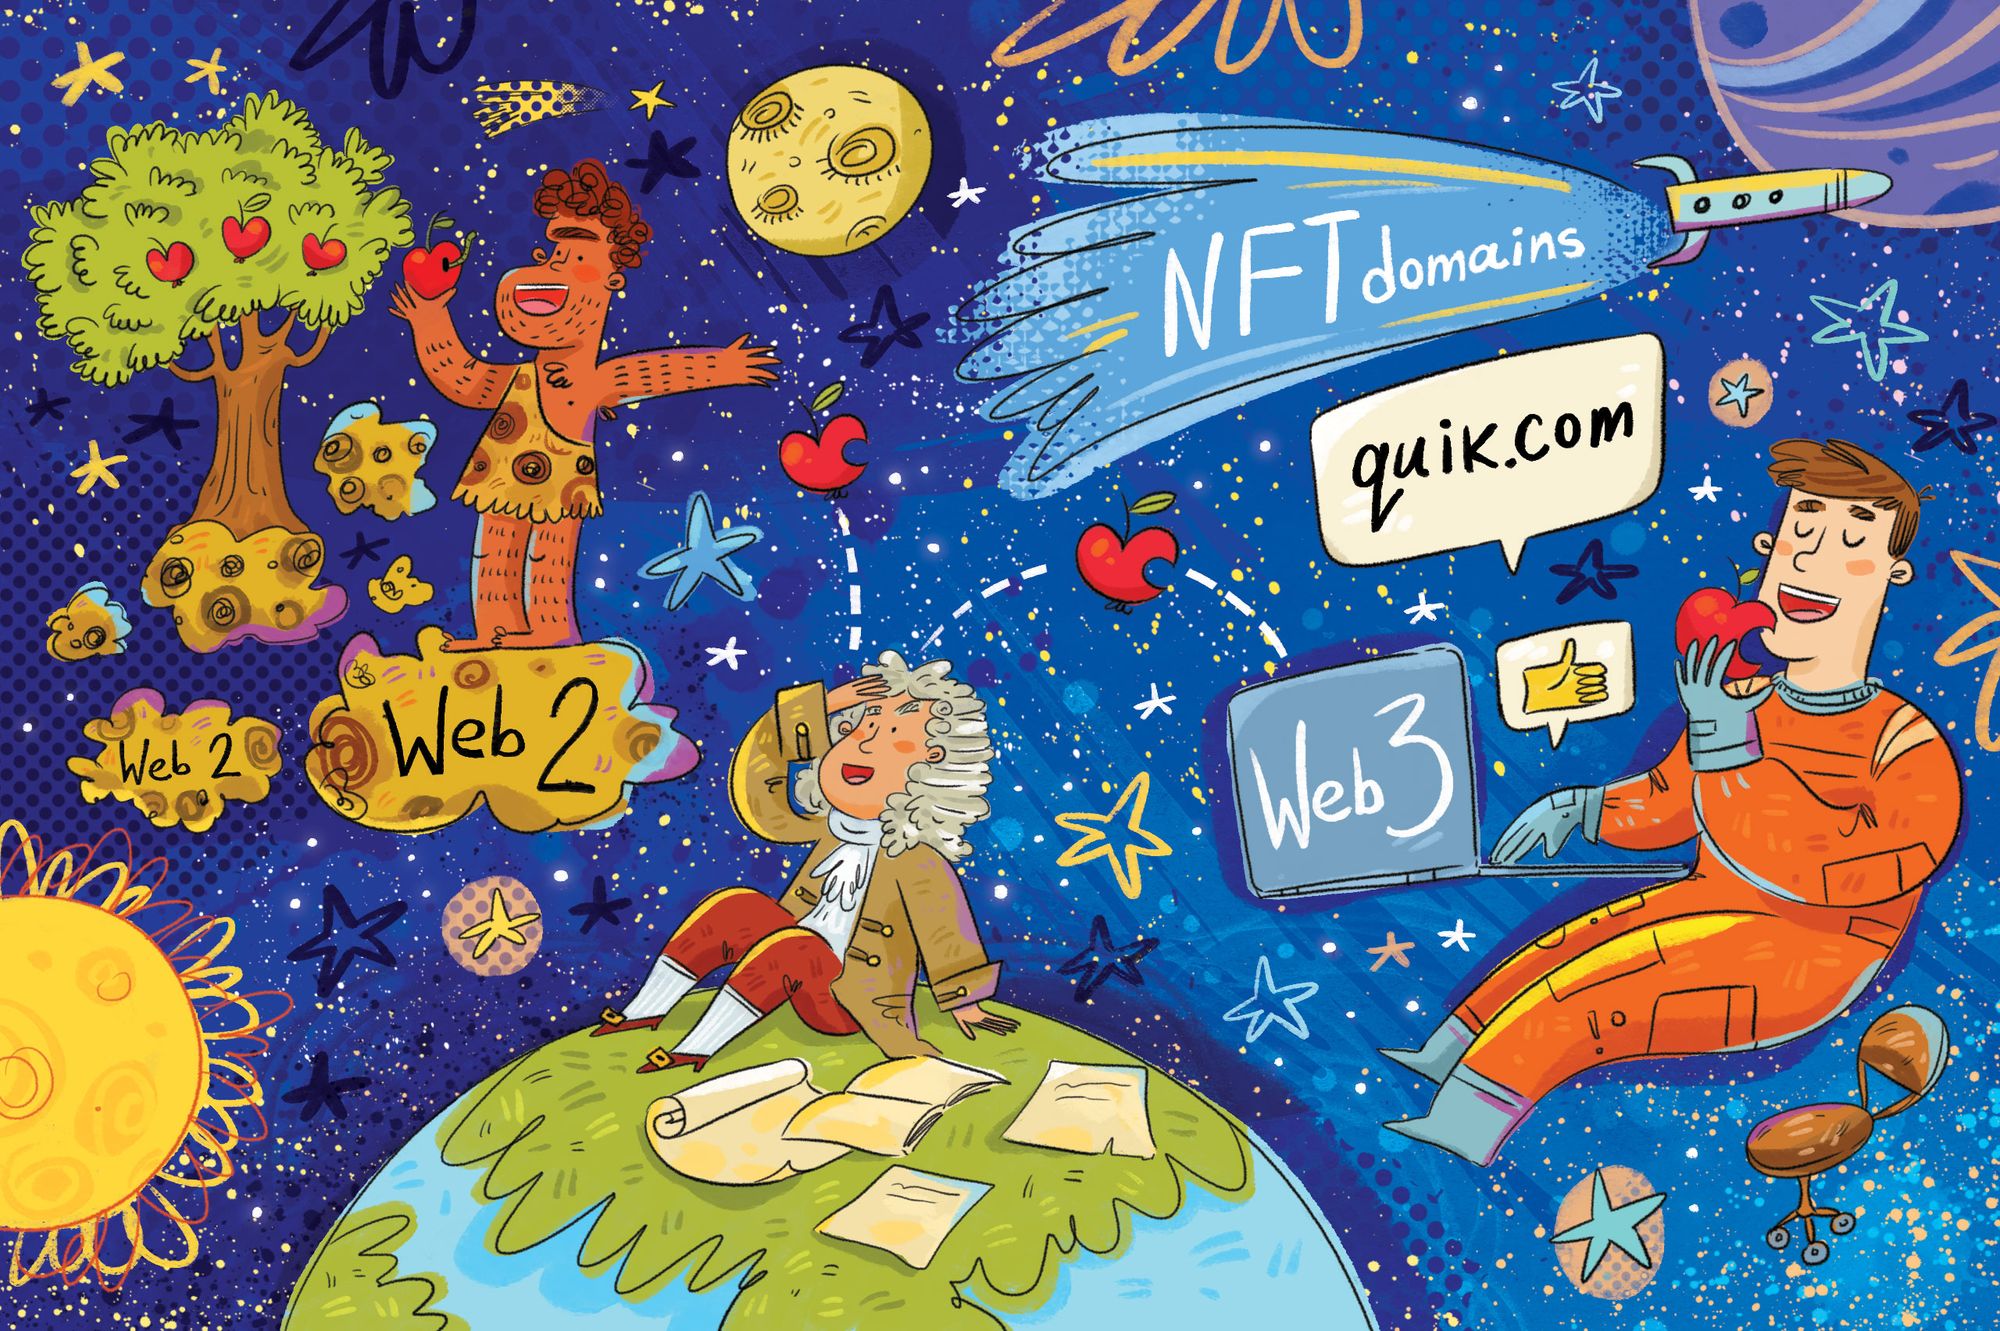 The potential of NFT Domains and Quik.com